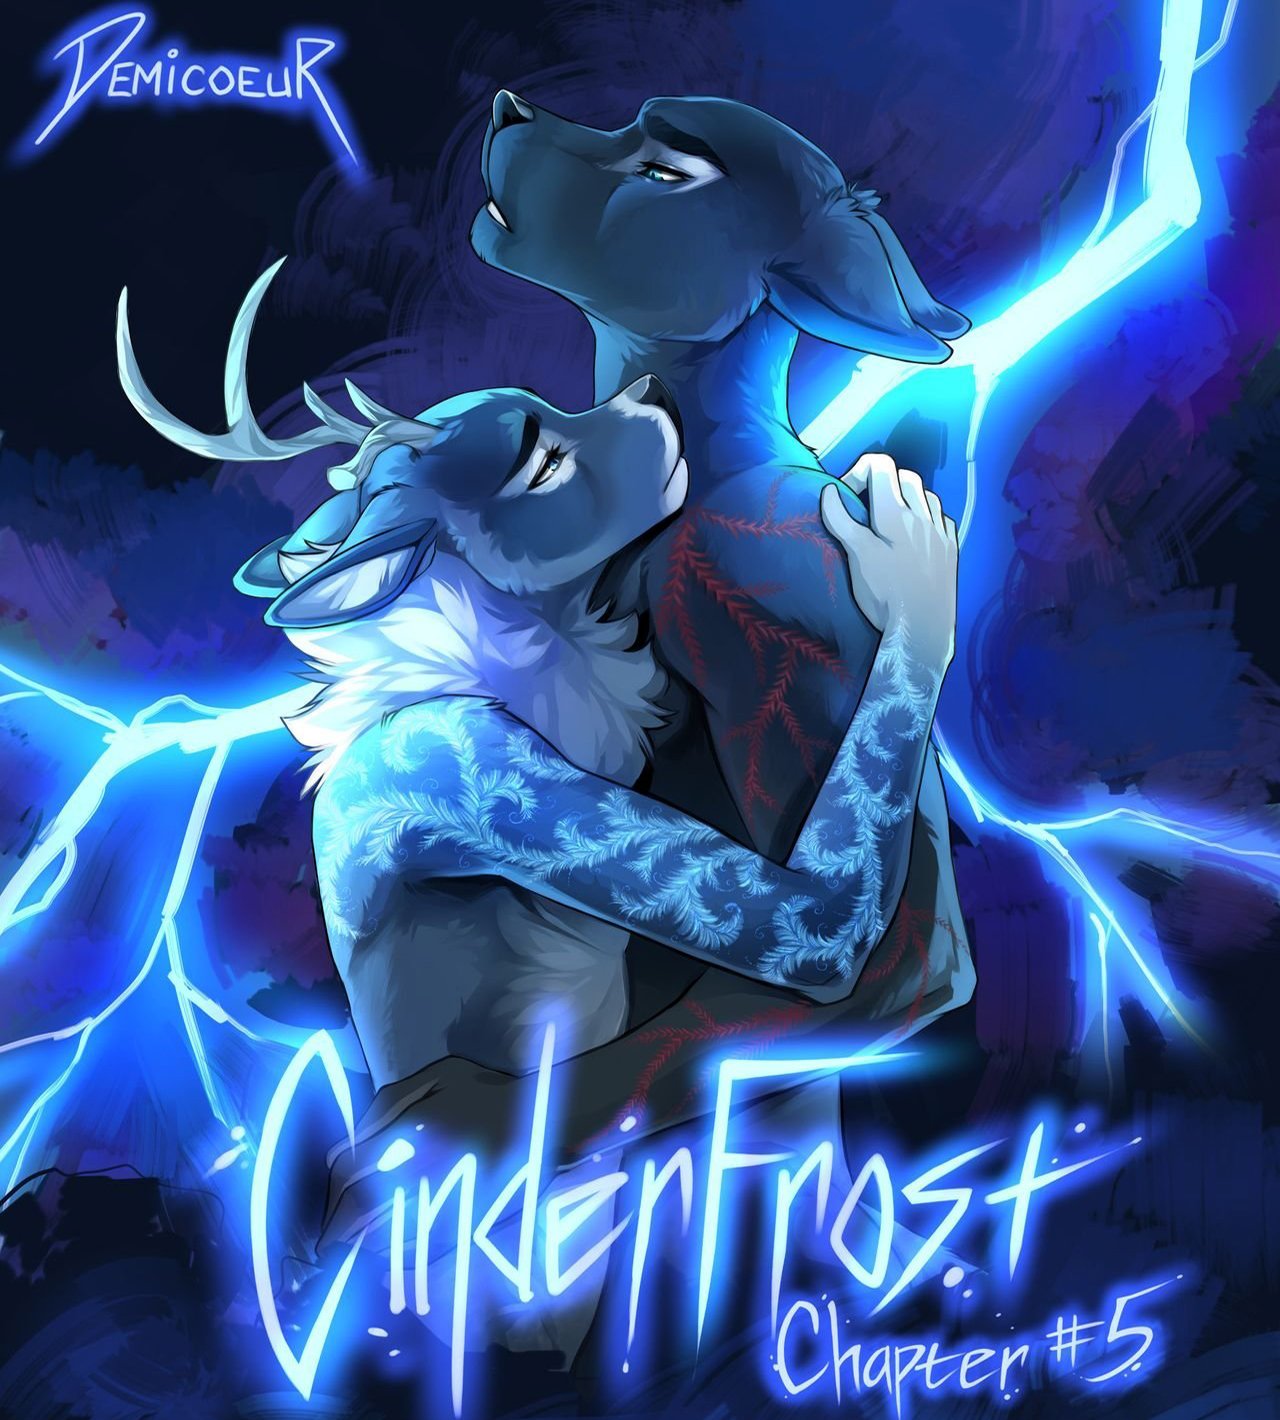 ...(Russian by kozzy)cinderfrost yiff cinder bottomDemicoeur ComicsFurry hd...